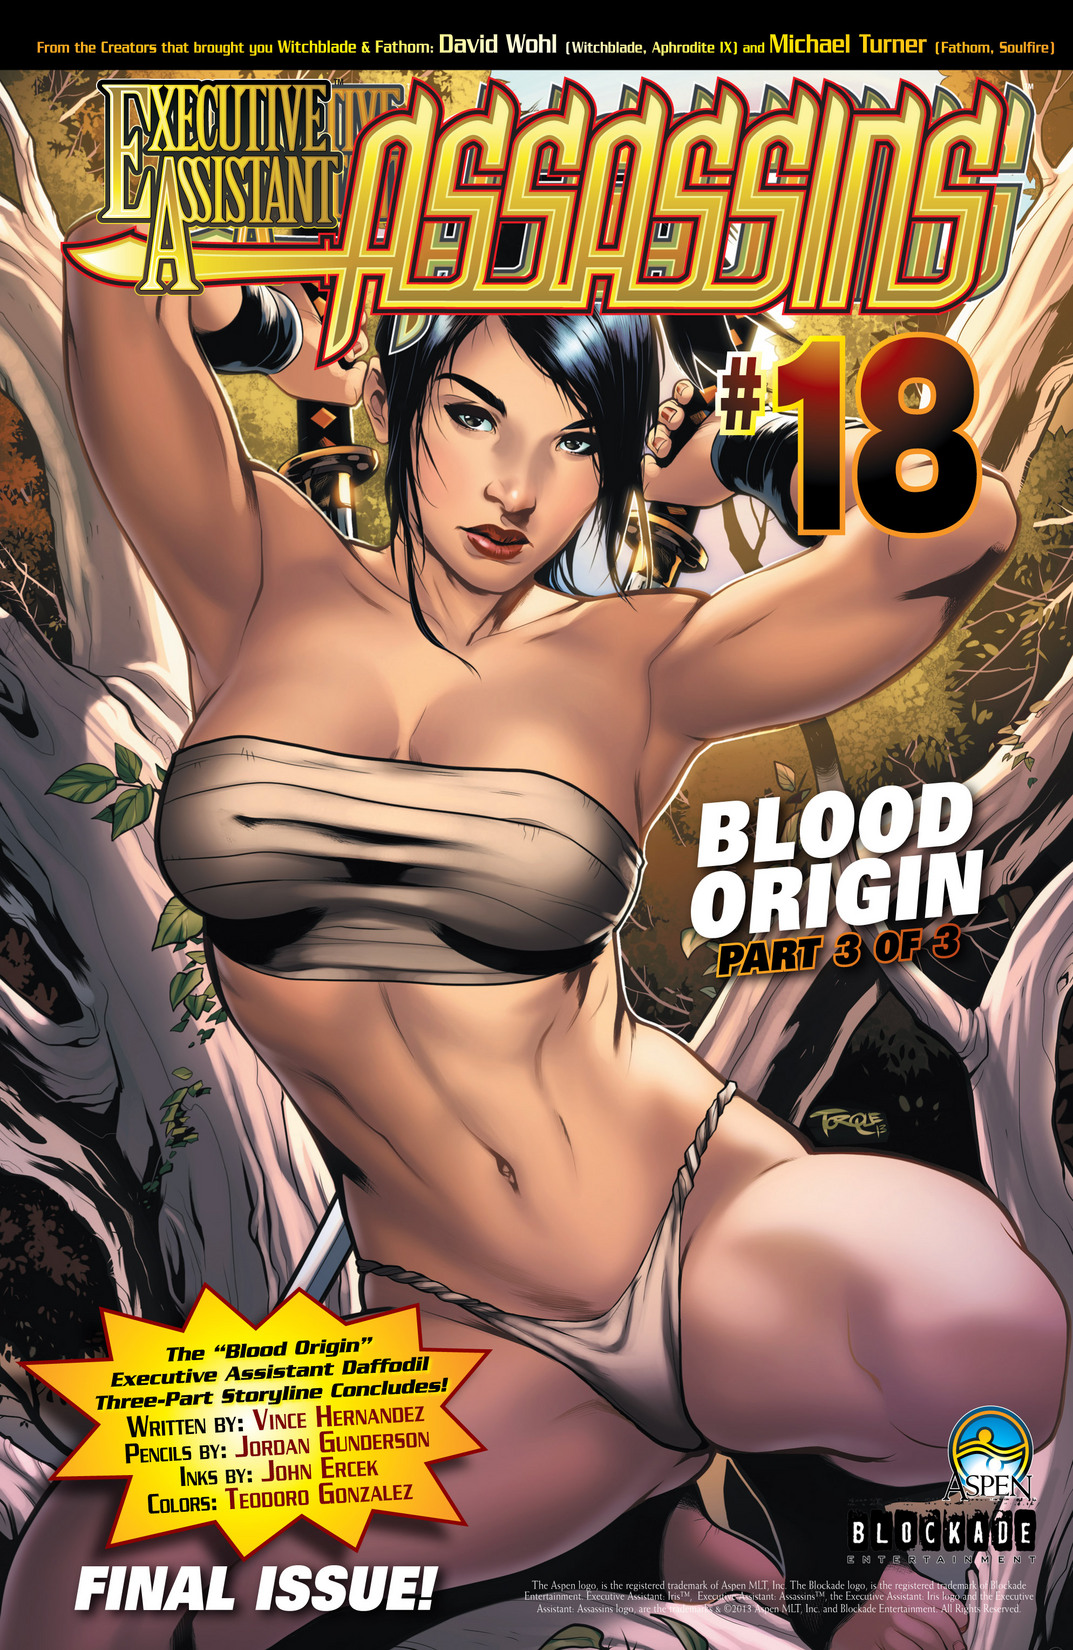 Read online Executive Assistant: Assassins comic -  Issue #17 - 24